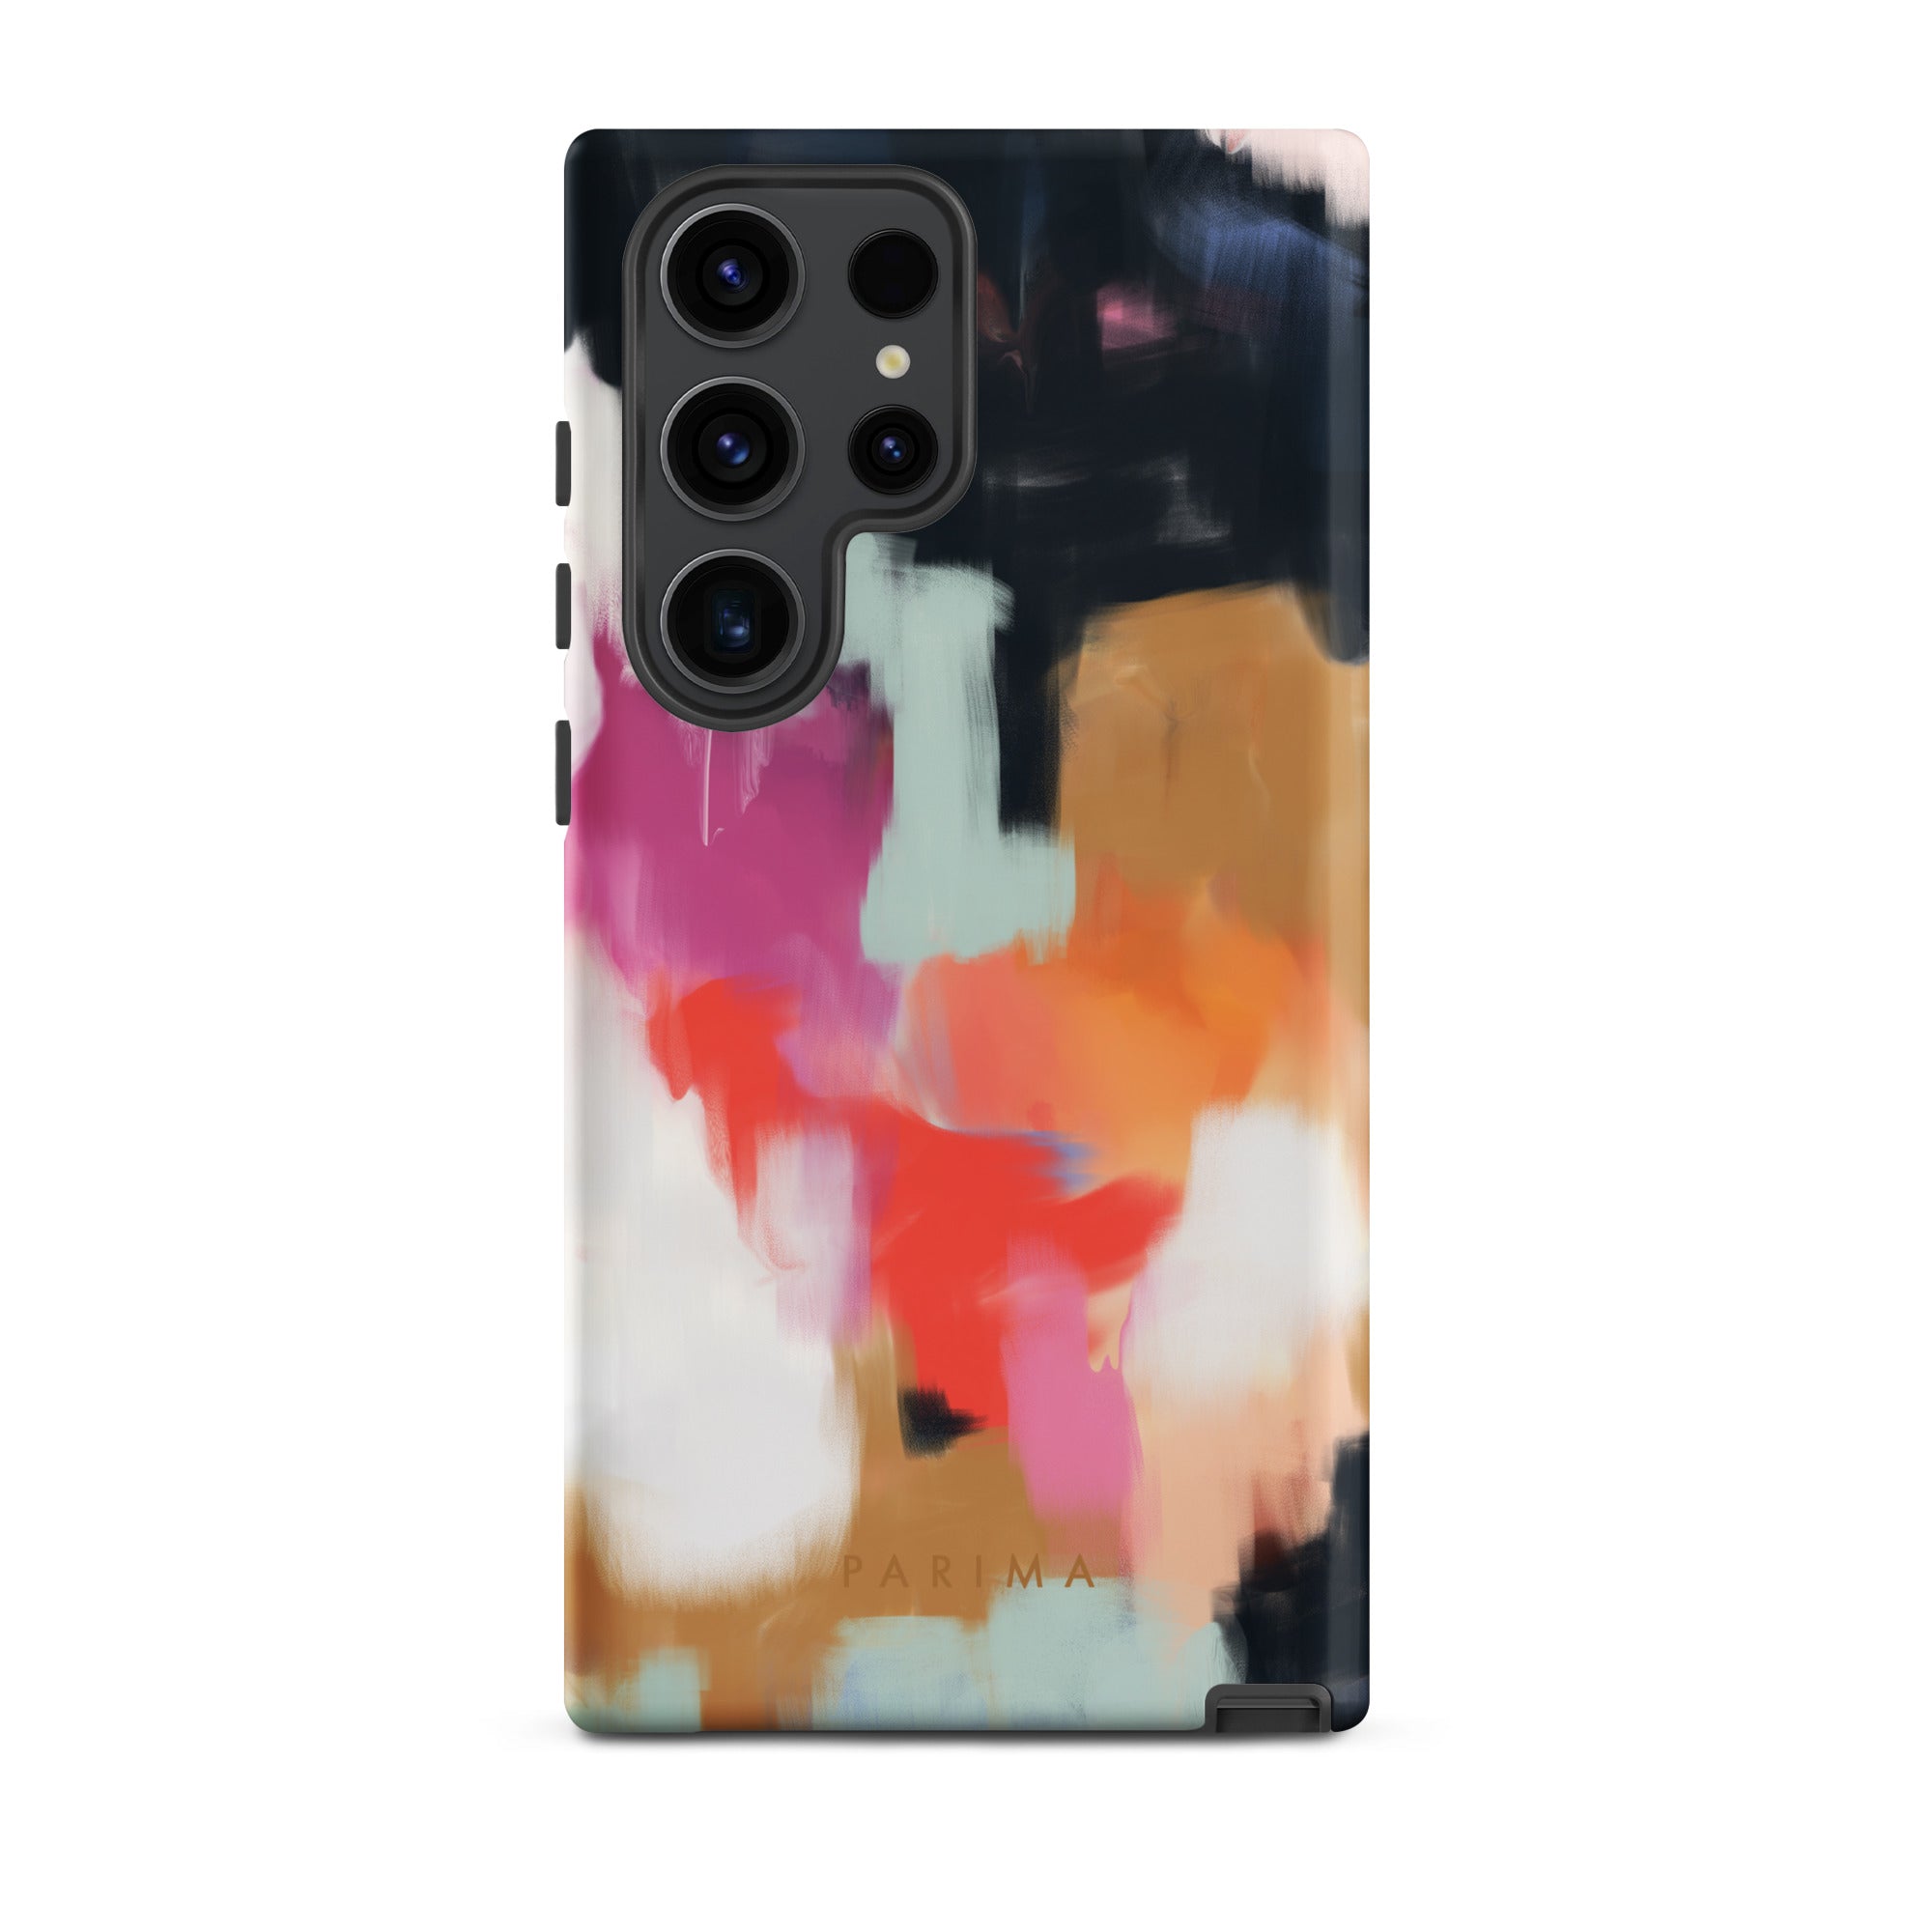 Ruthie, blue and pink abstract art on Samsung Galaxy S23 Ultra tough case by Parima Studio